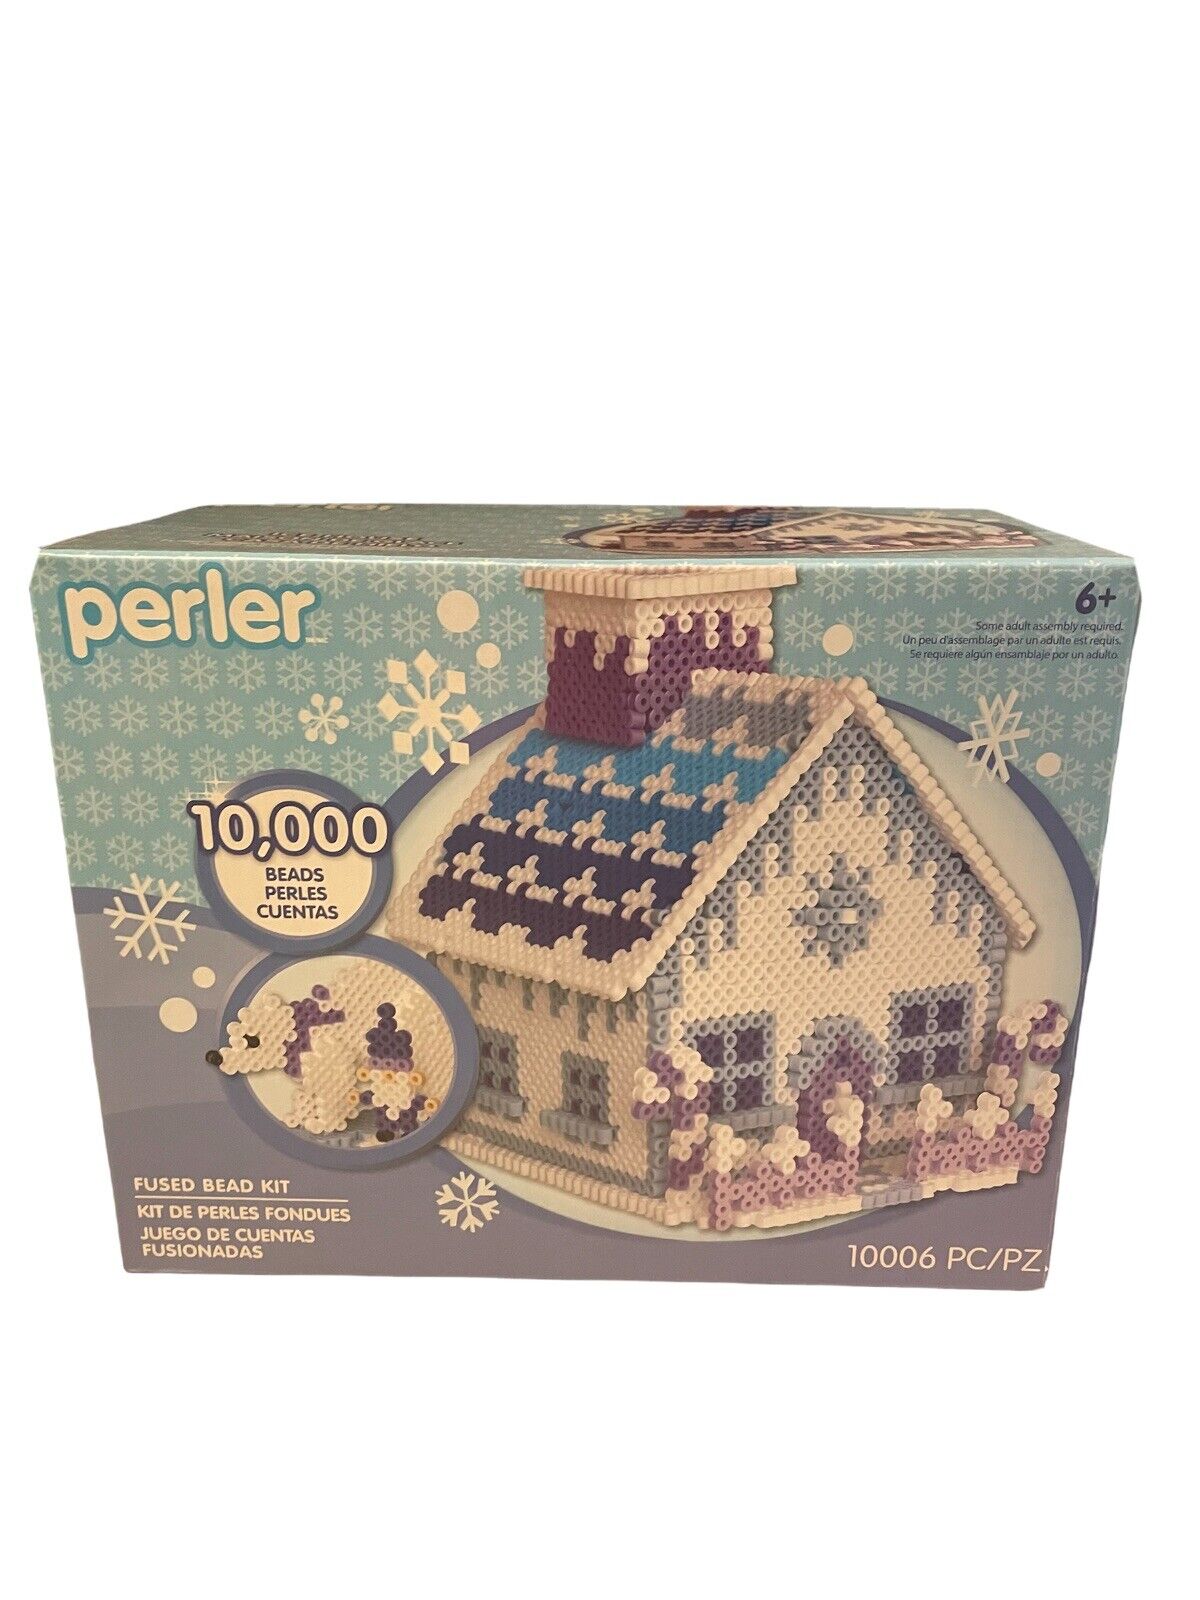 Craft Perler Bead Ice House Fused Bead Kit 10,000+ pieces Brand New in Box